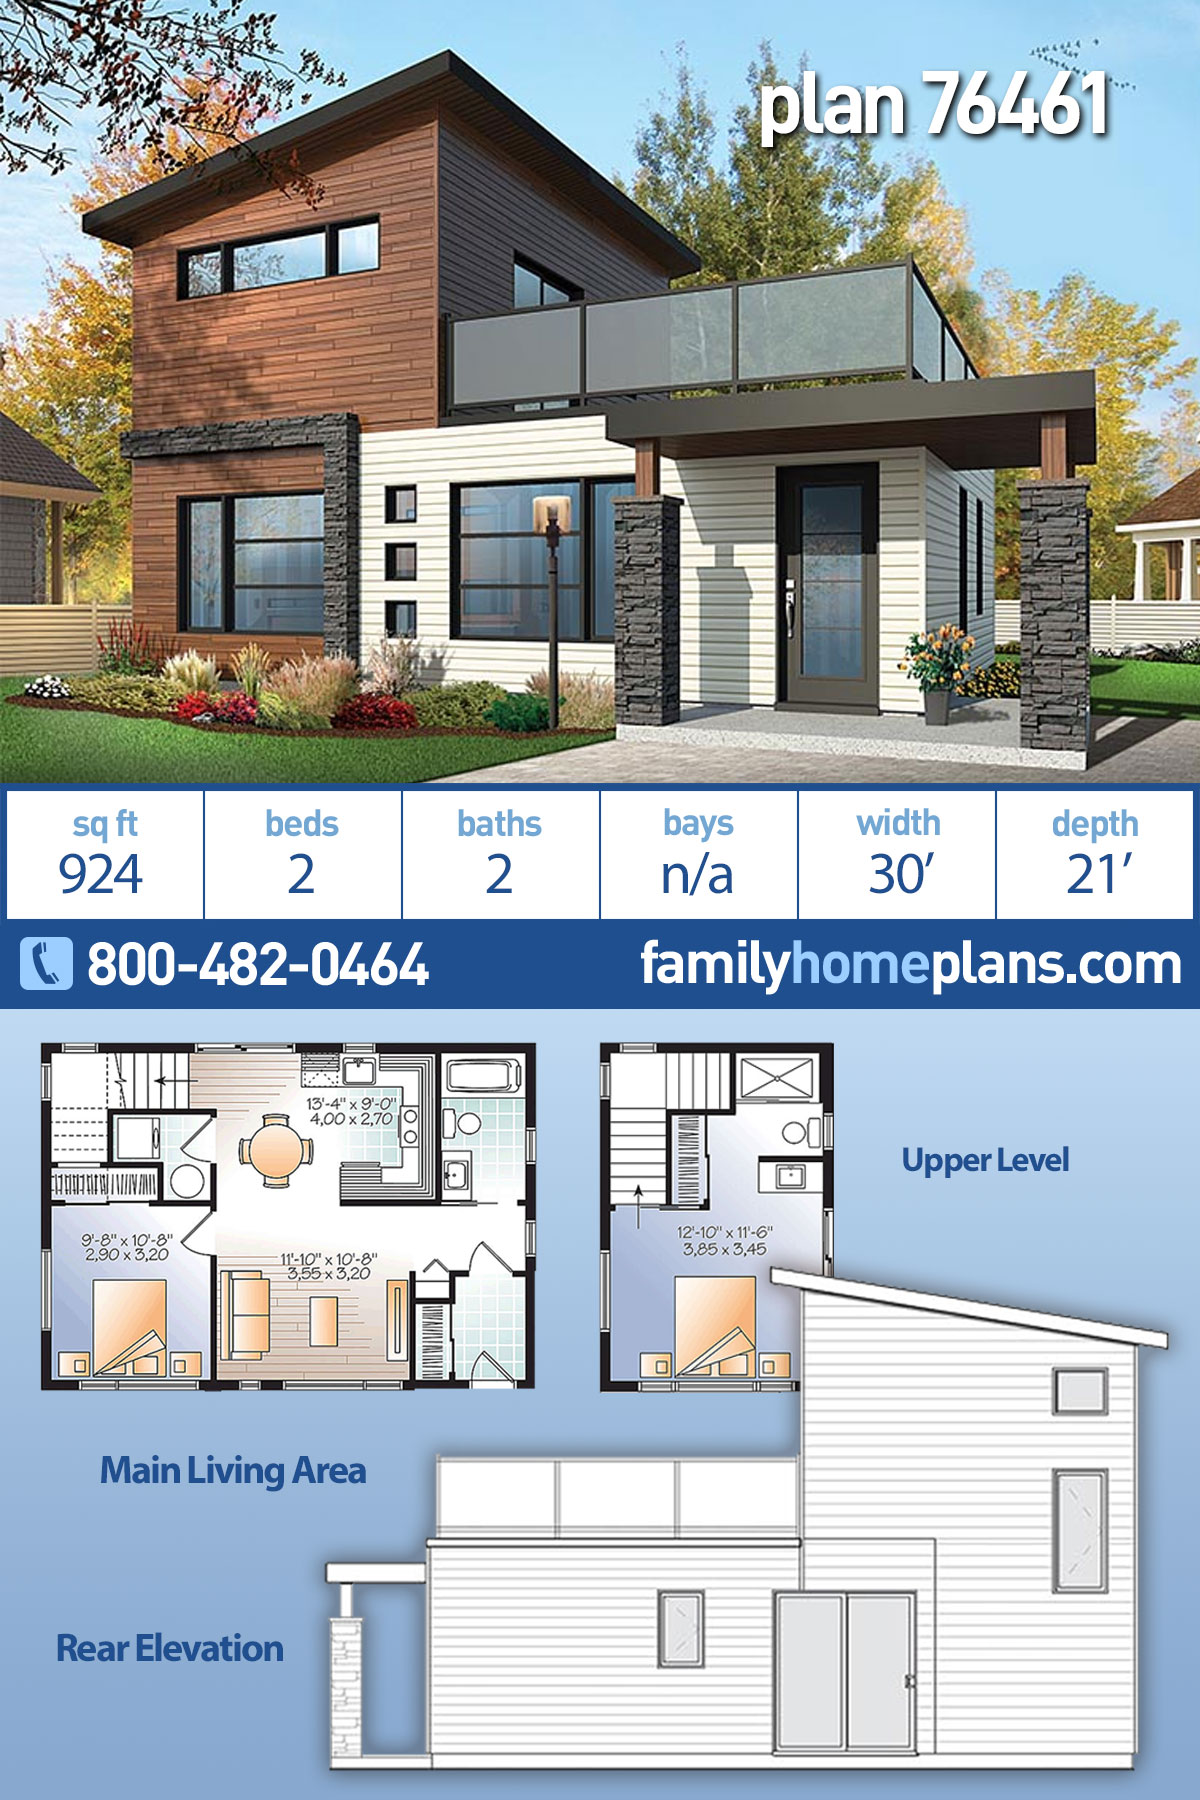 Modern Style House Plan 76461 With 2 Bed 2 Bath